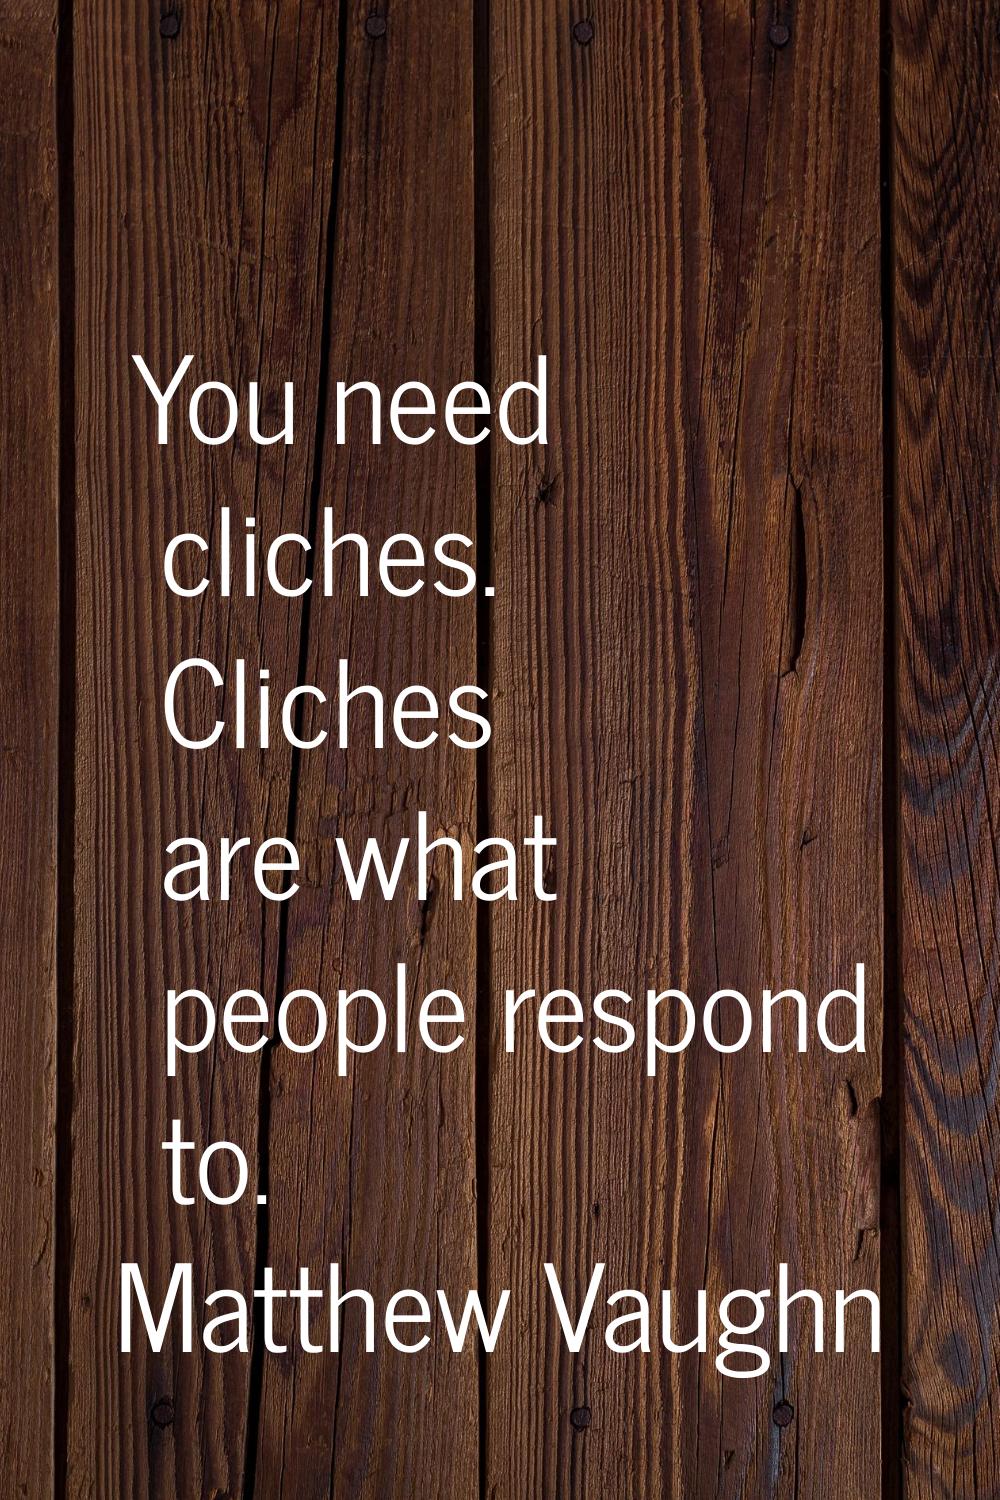 You need cliches. Cliches are what people respond to.